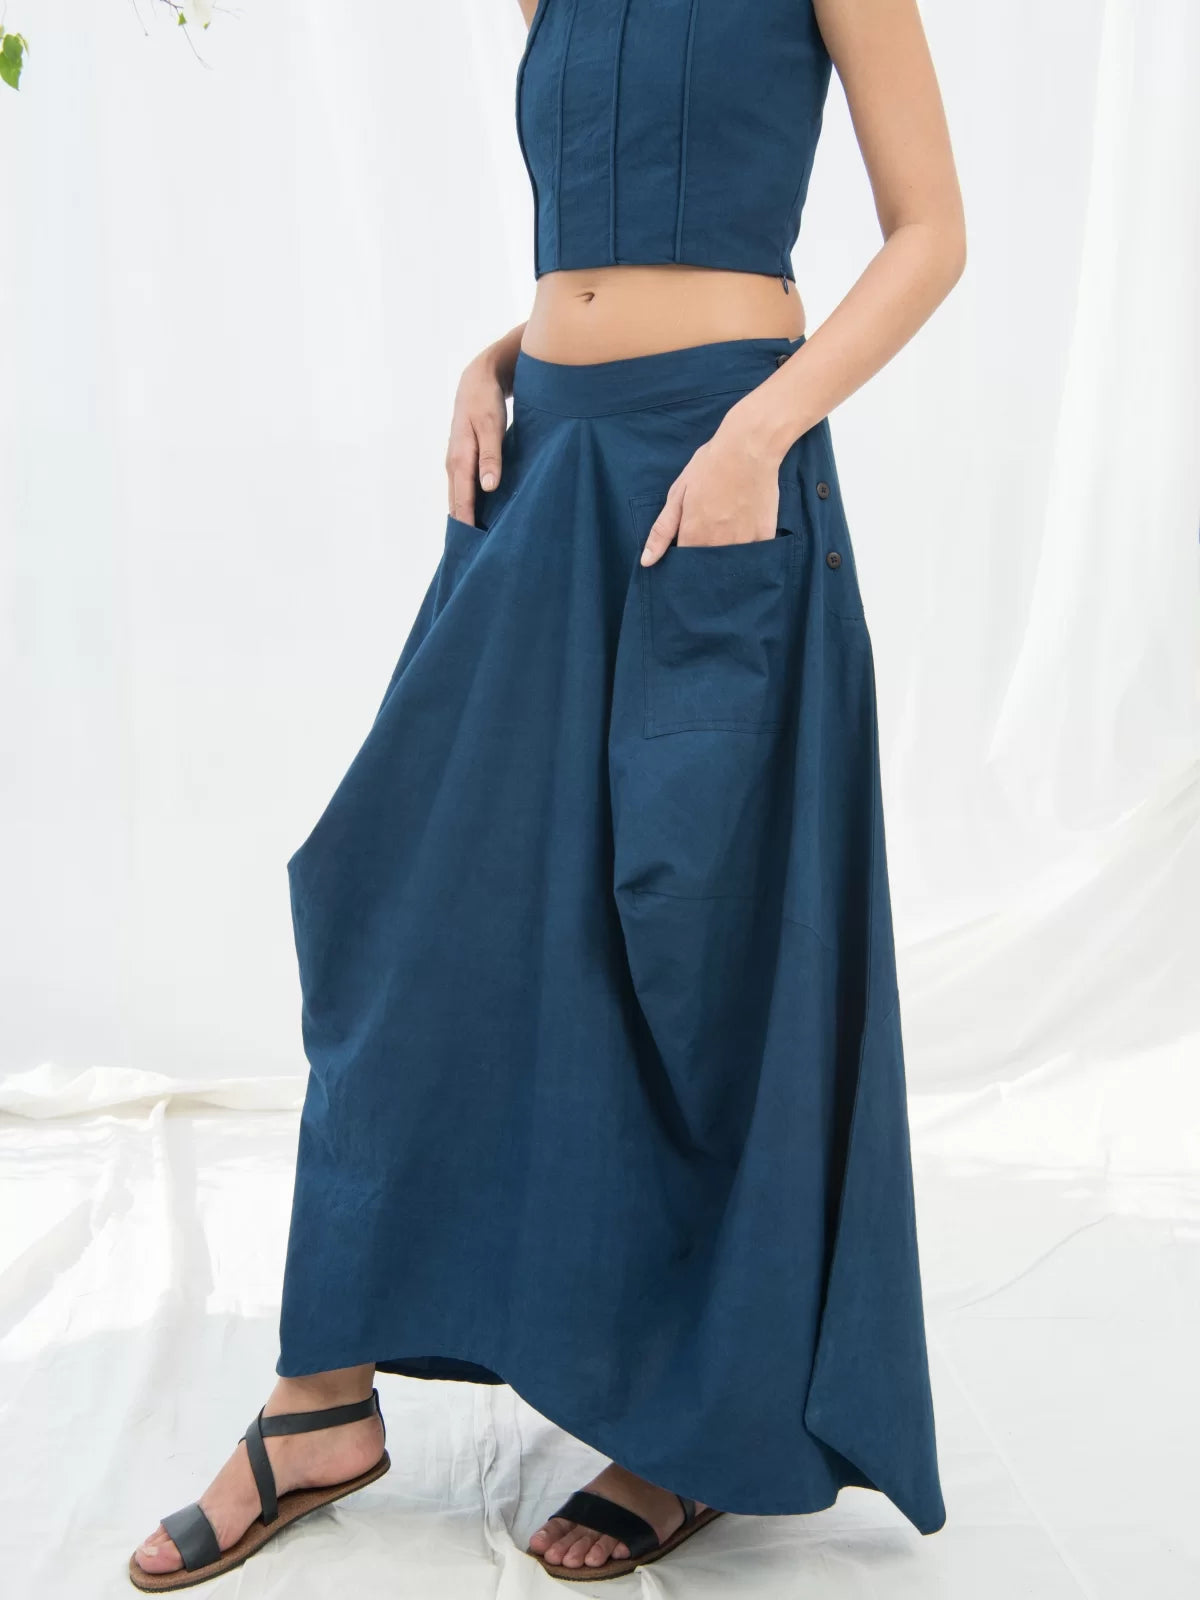 Clementina – Slouchy Skirt